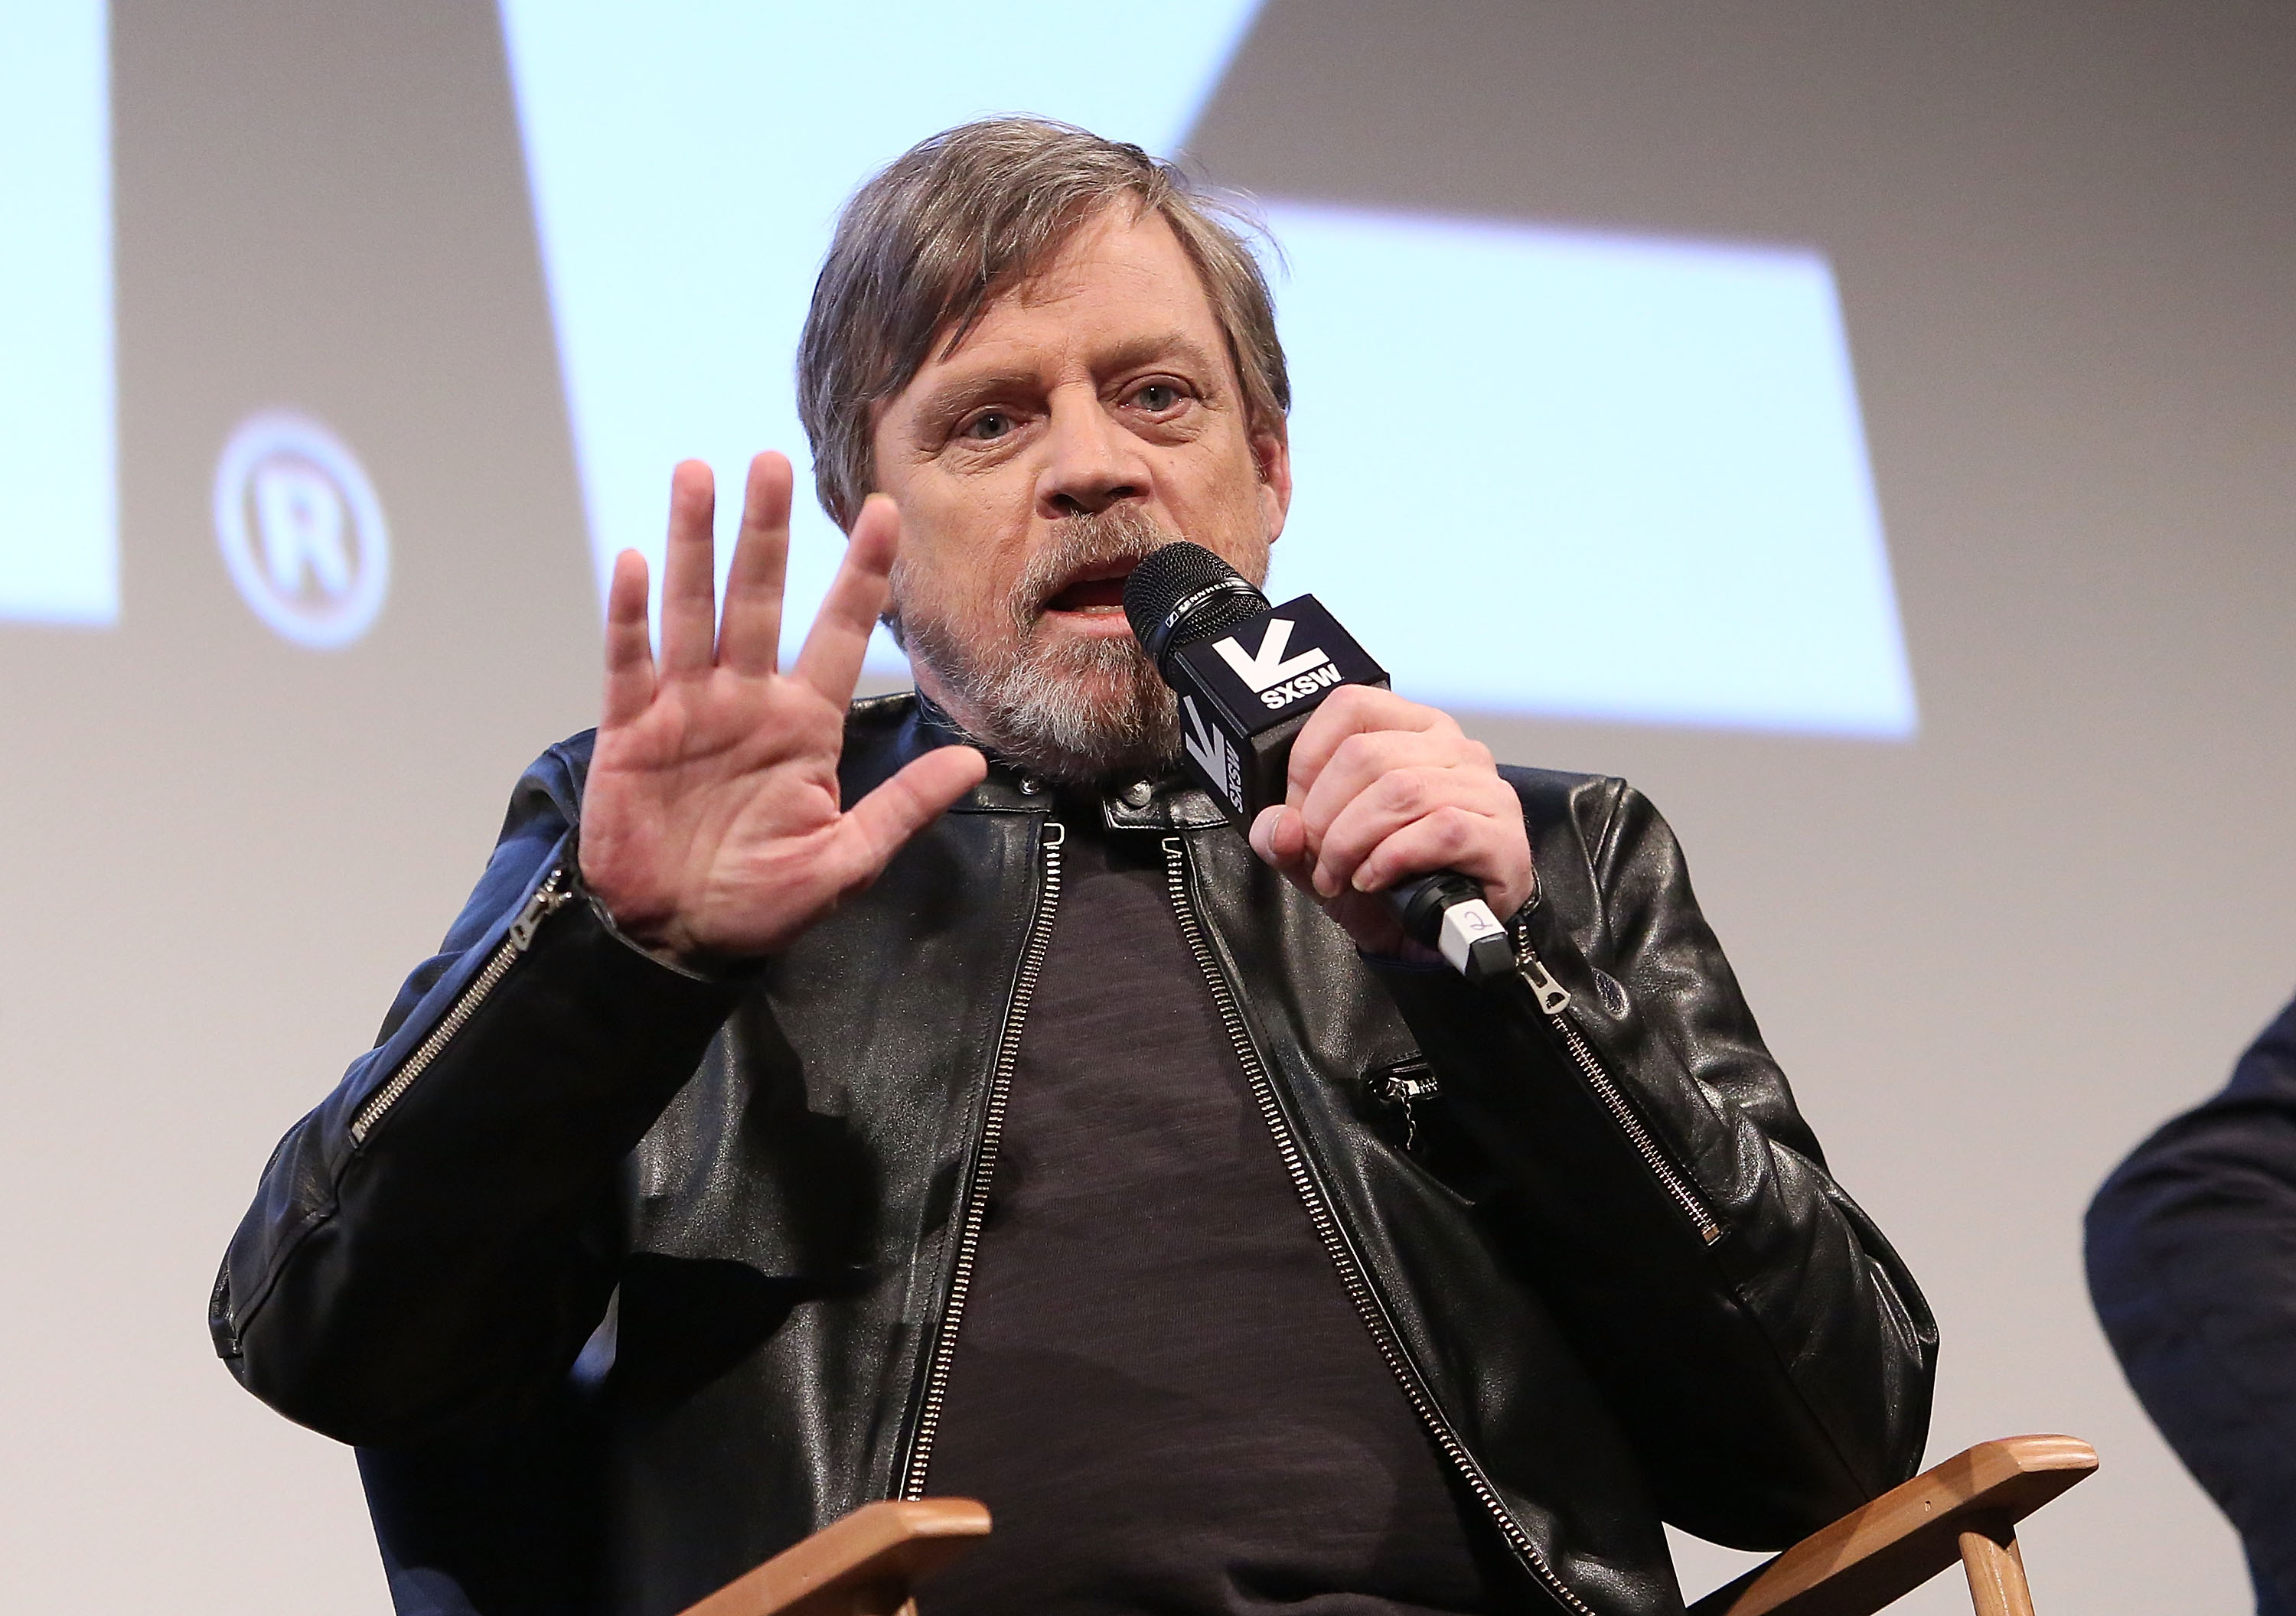 Star Wars actor Mark Hamill attends the premiere of the documentary The Director and the Jedi at SXSW